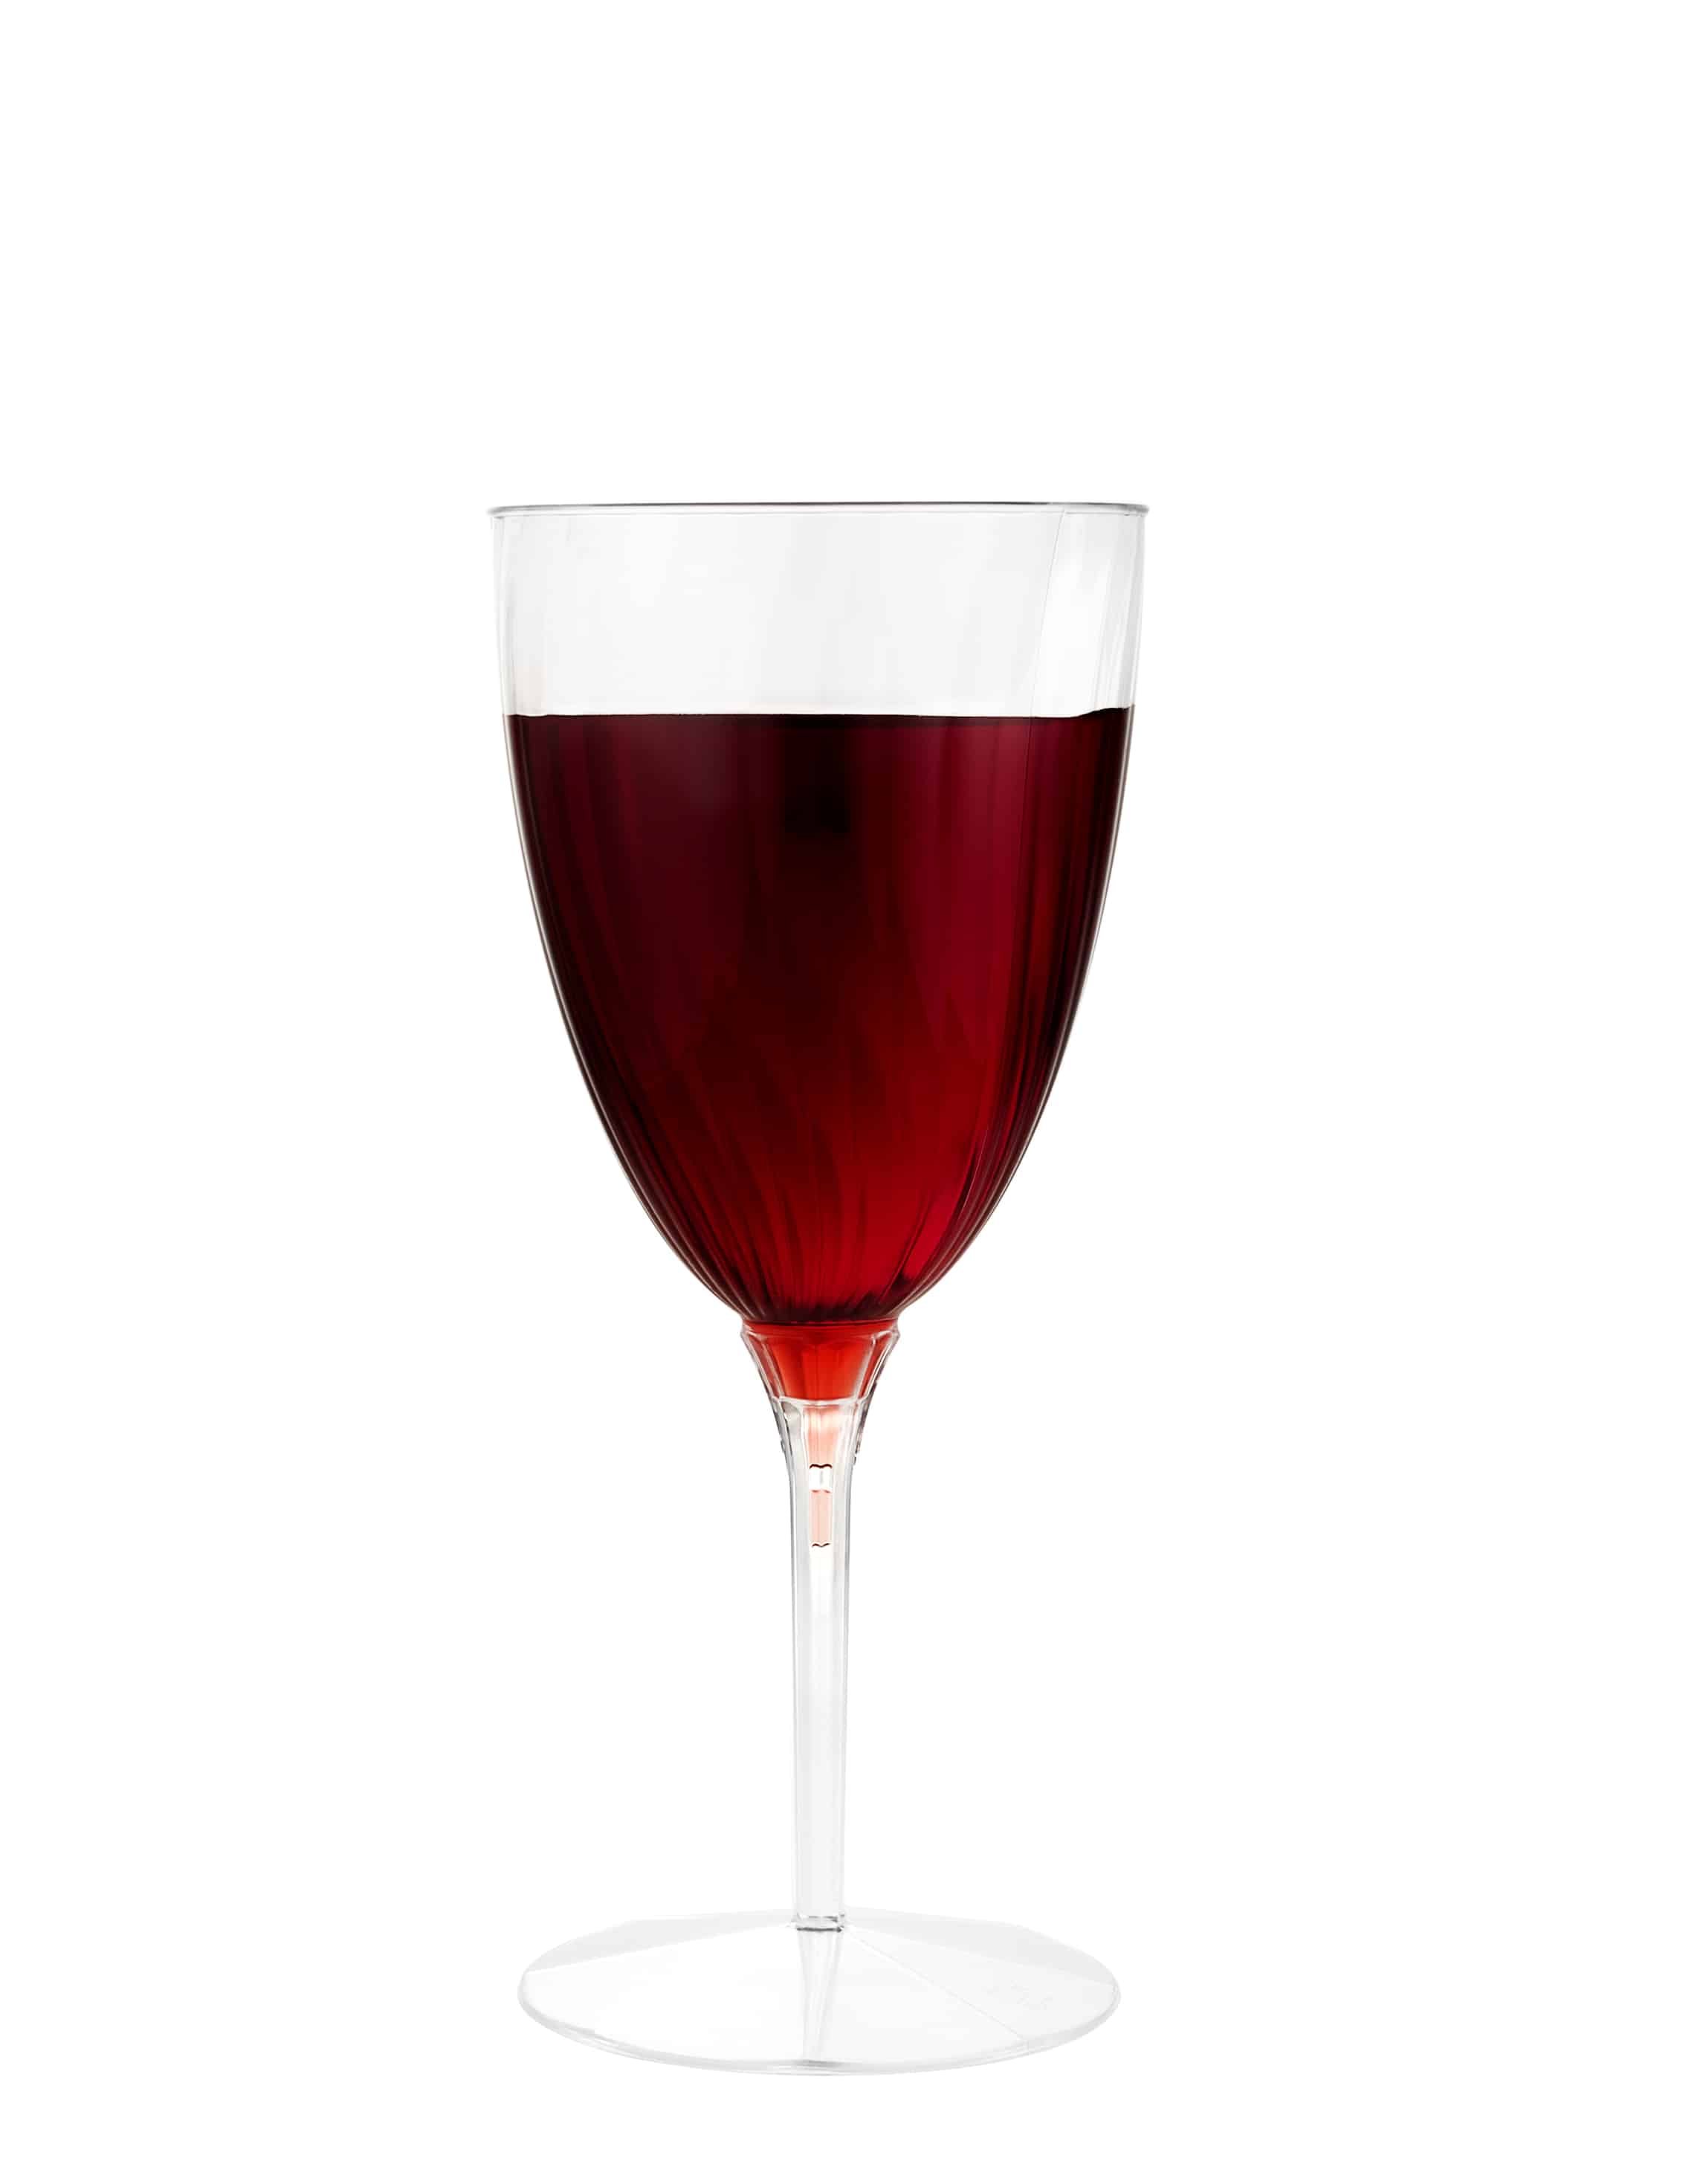 8oz Reusable Red Plastic Wine Cup